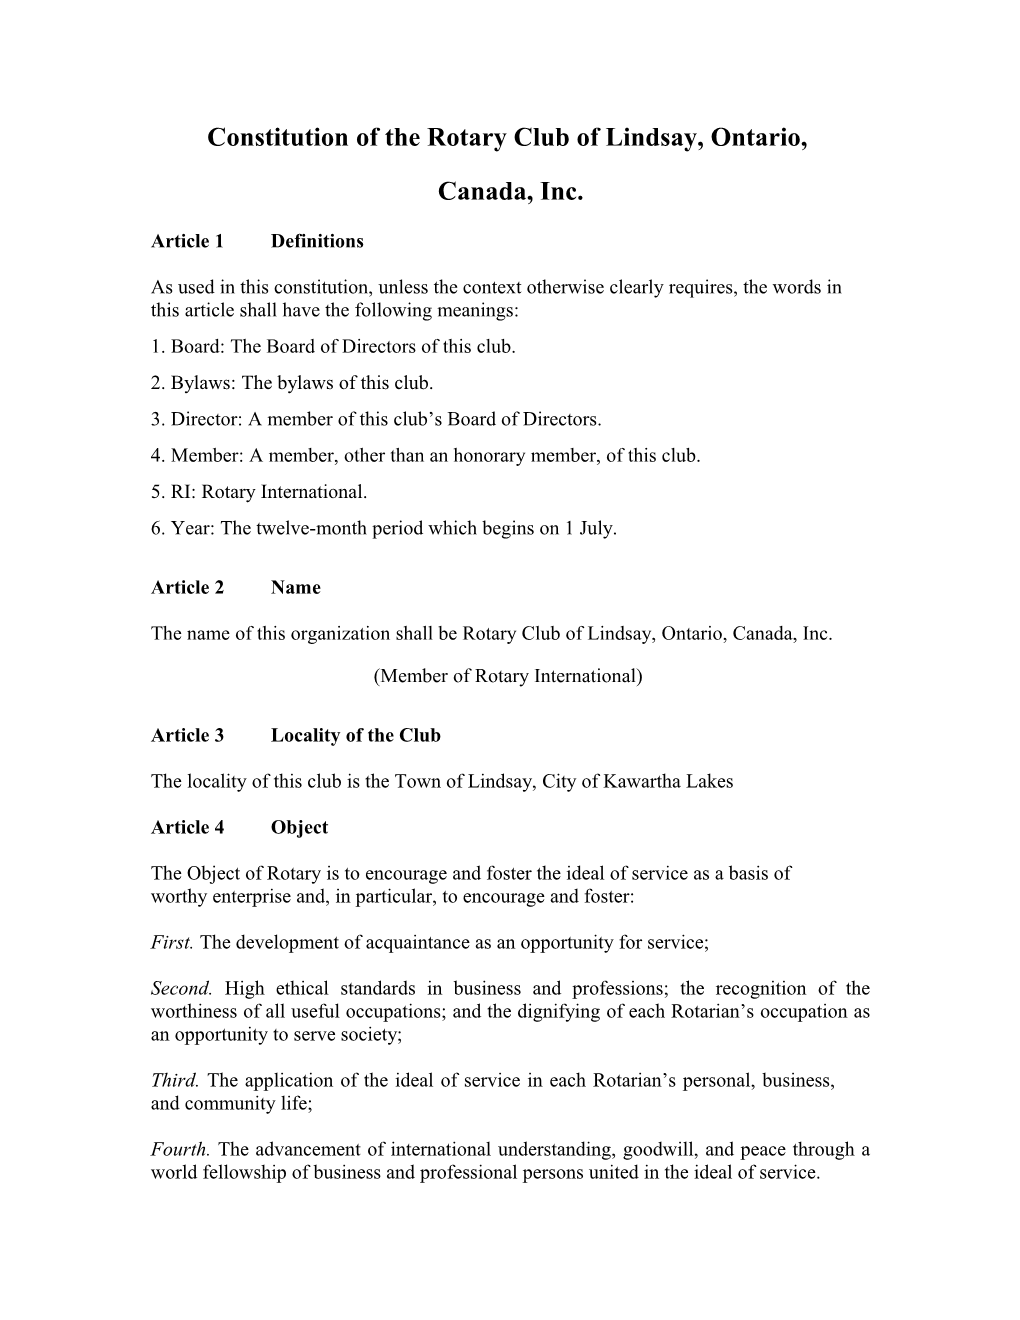 *Constitution of the Rotary Club of Lindsay, Ontario, Canada, Inc